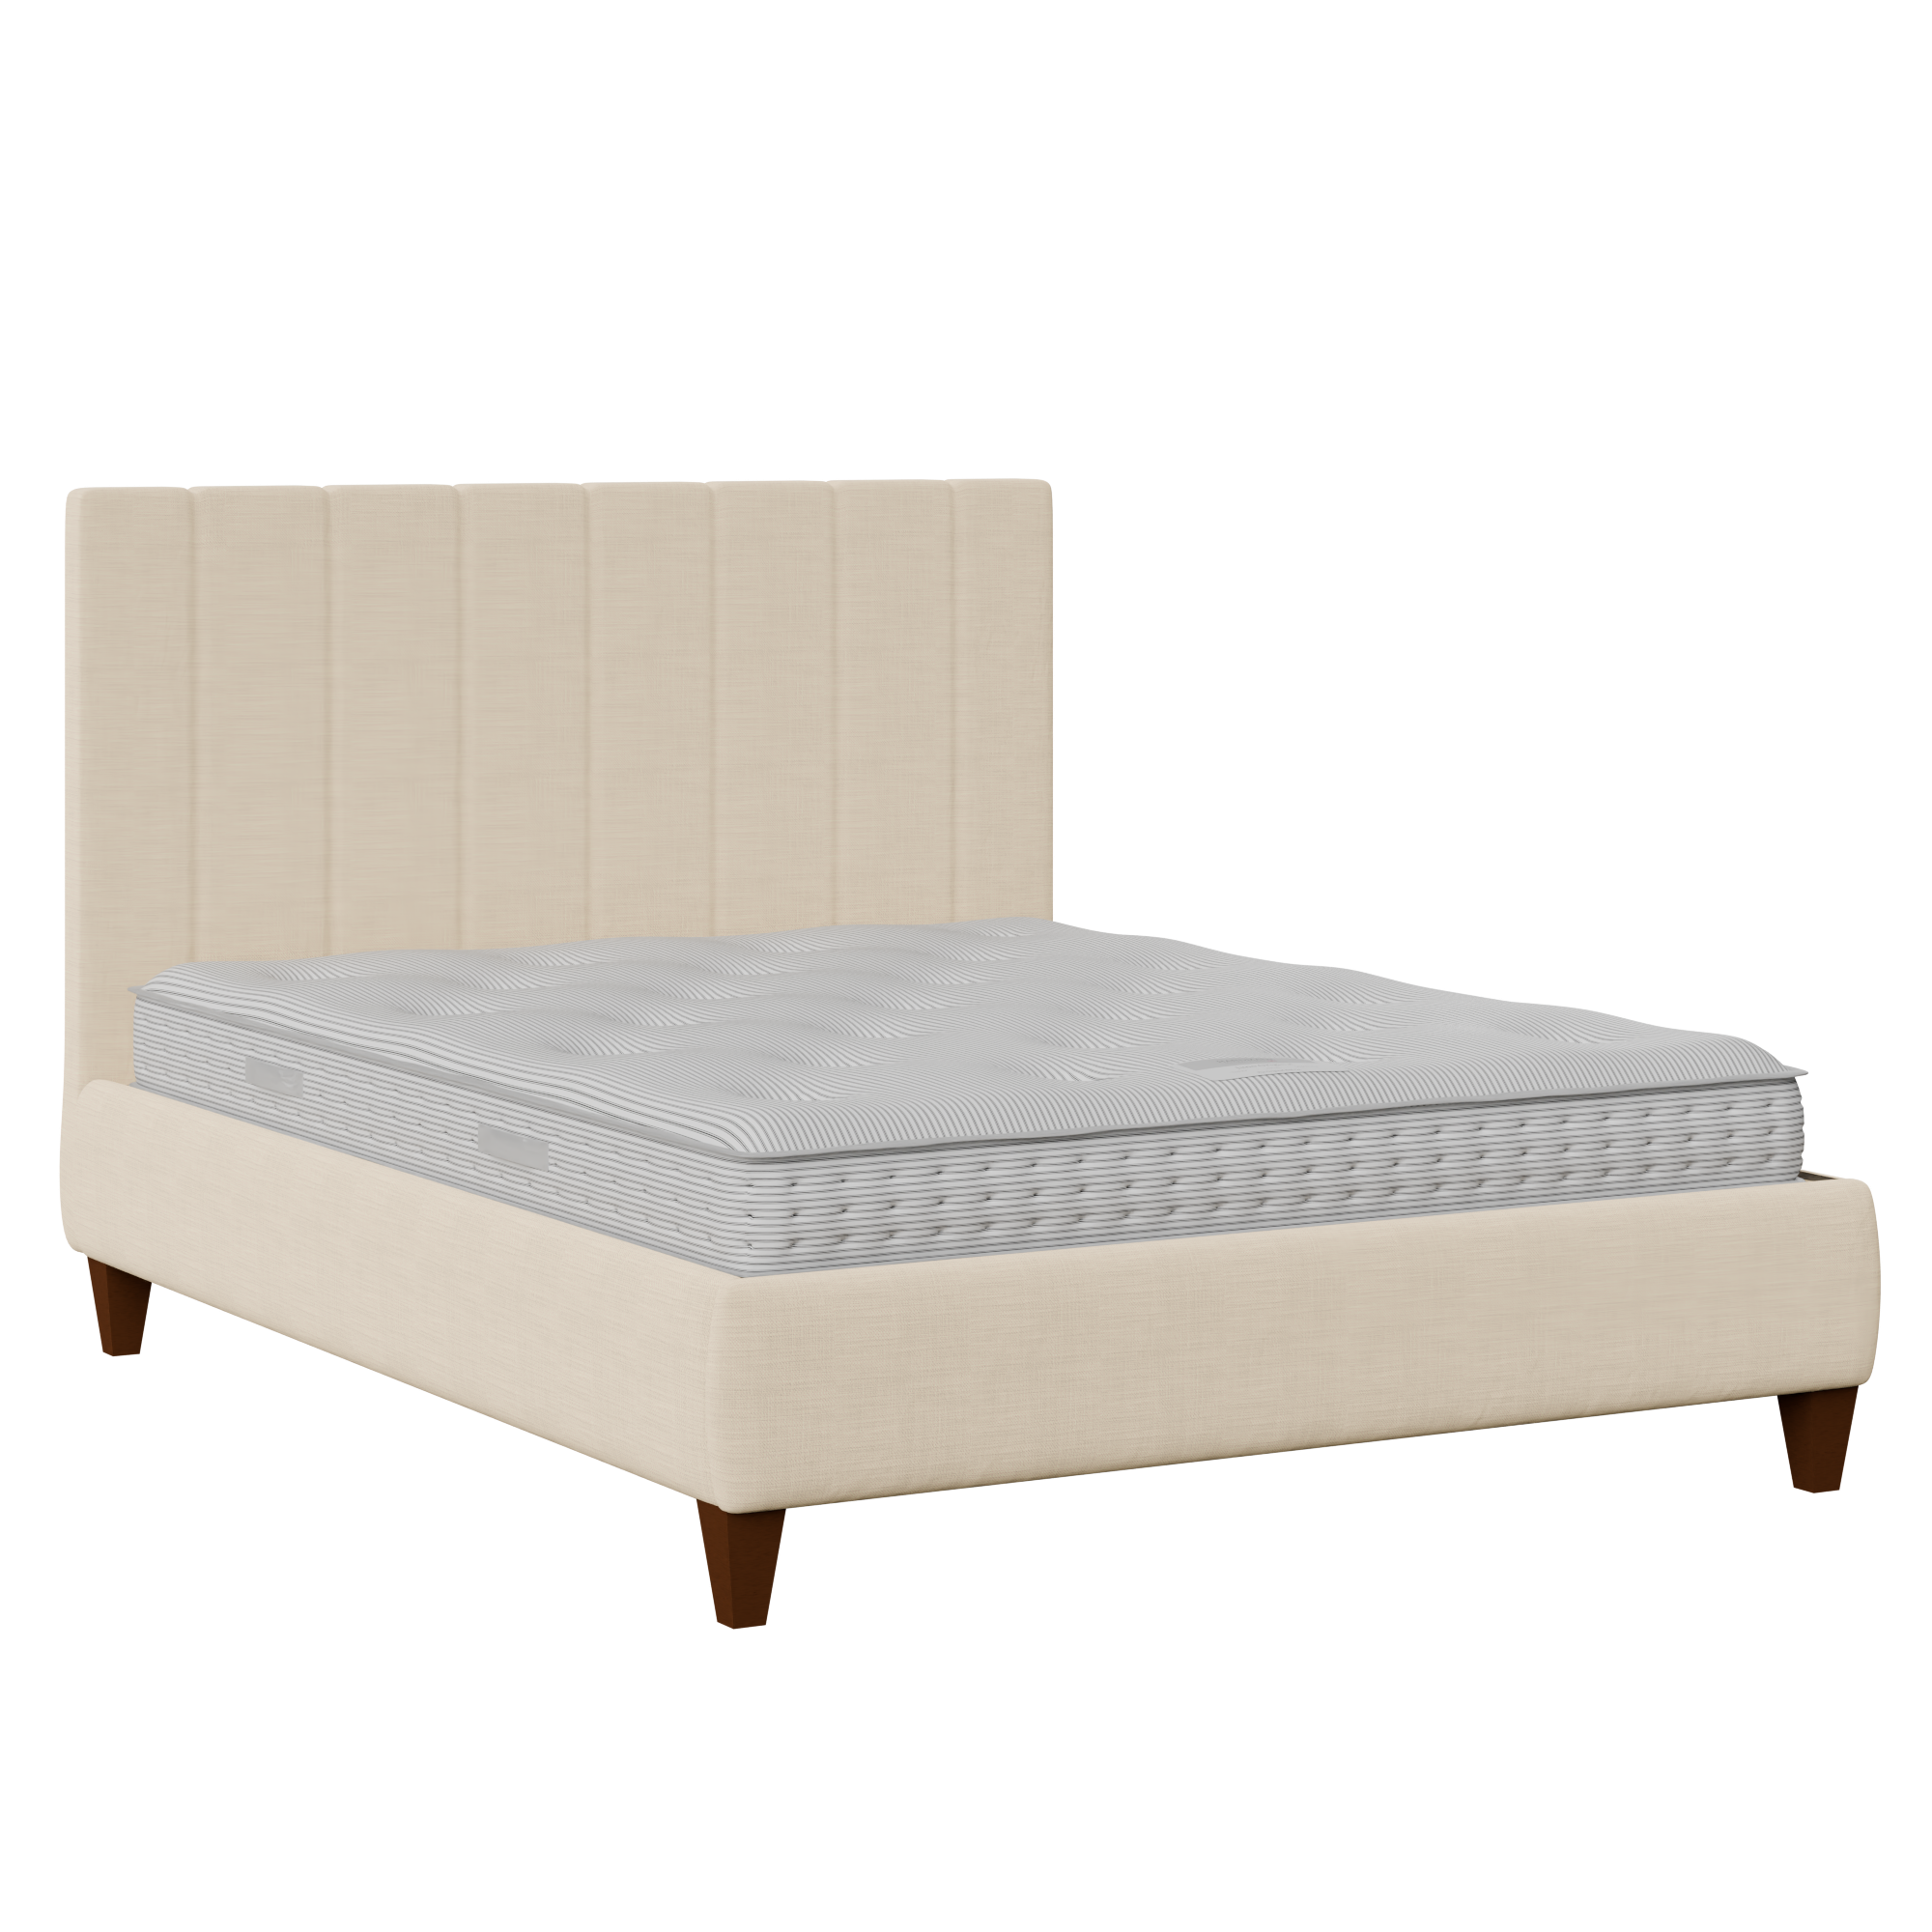 Yushan Pleated upholstered bed in natural fabric